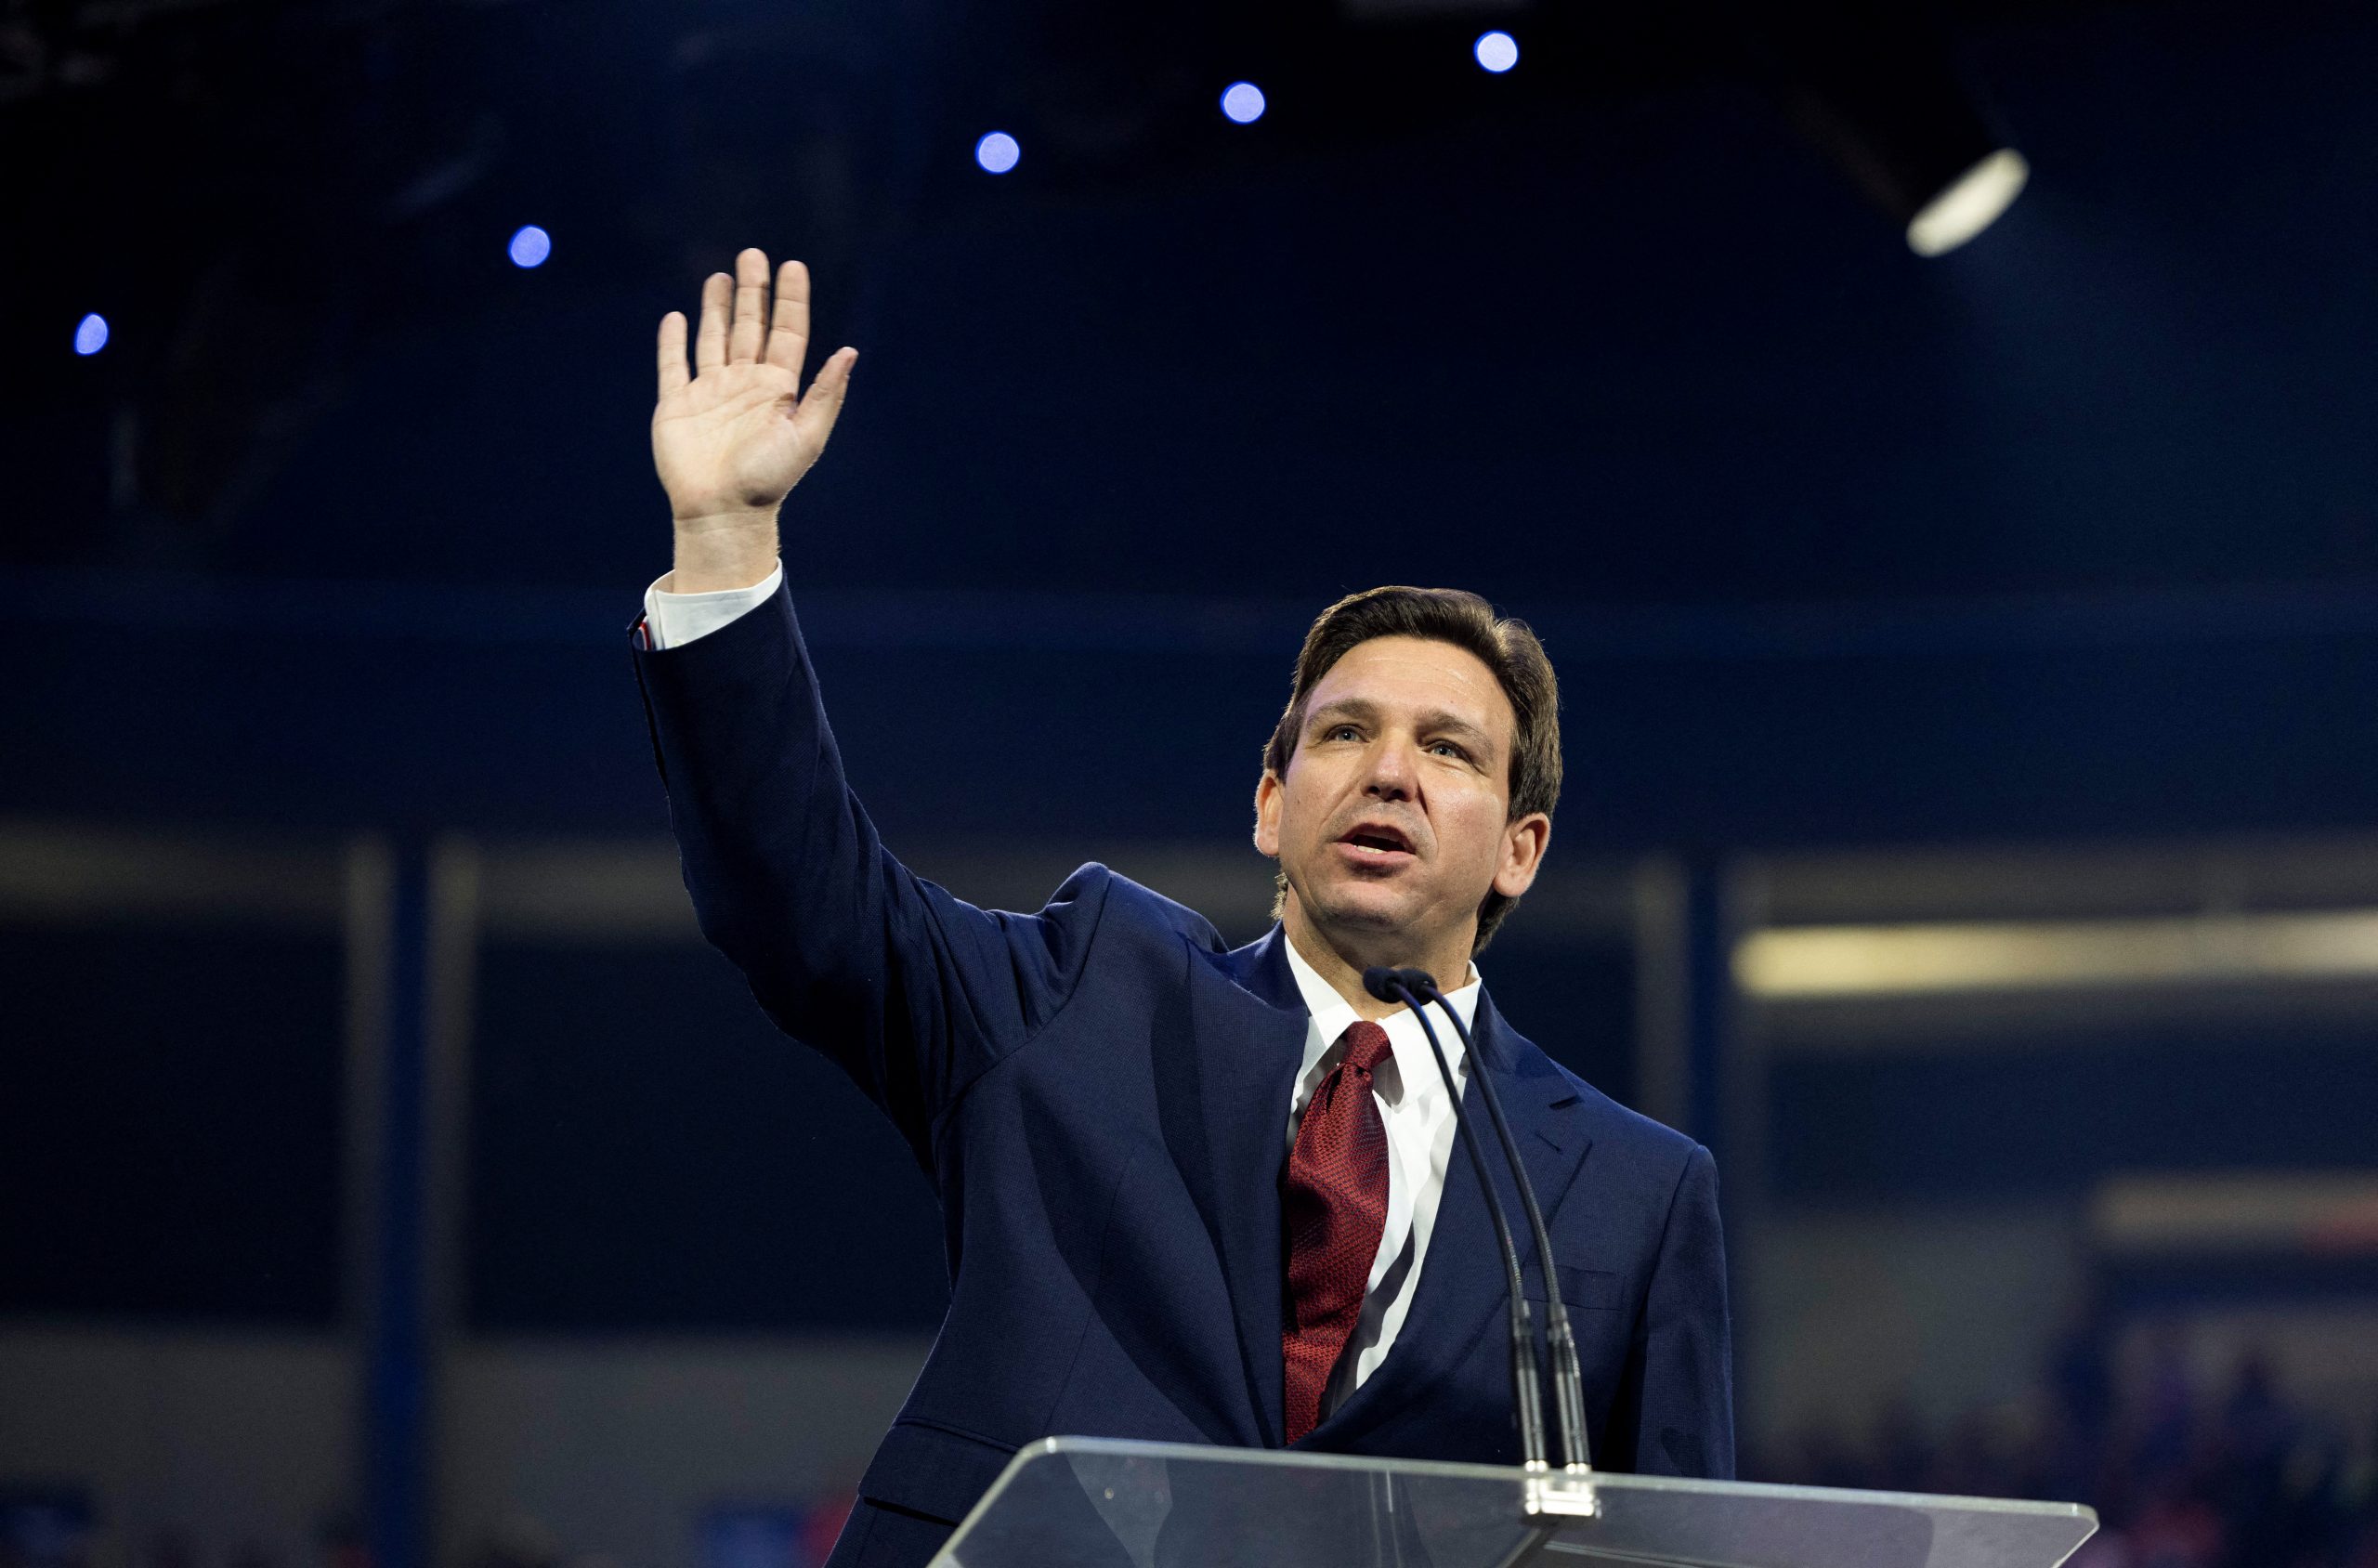 Before the anticipated 2024 go, DeSantis will attend Israel and many US allies.